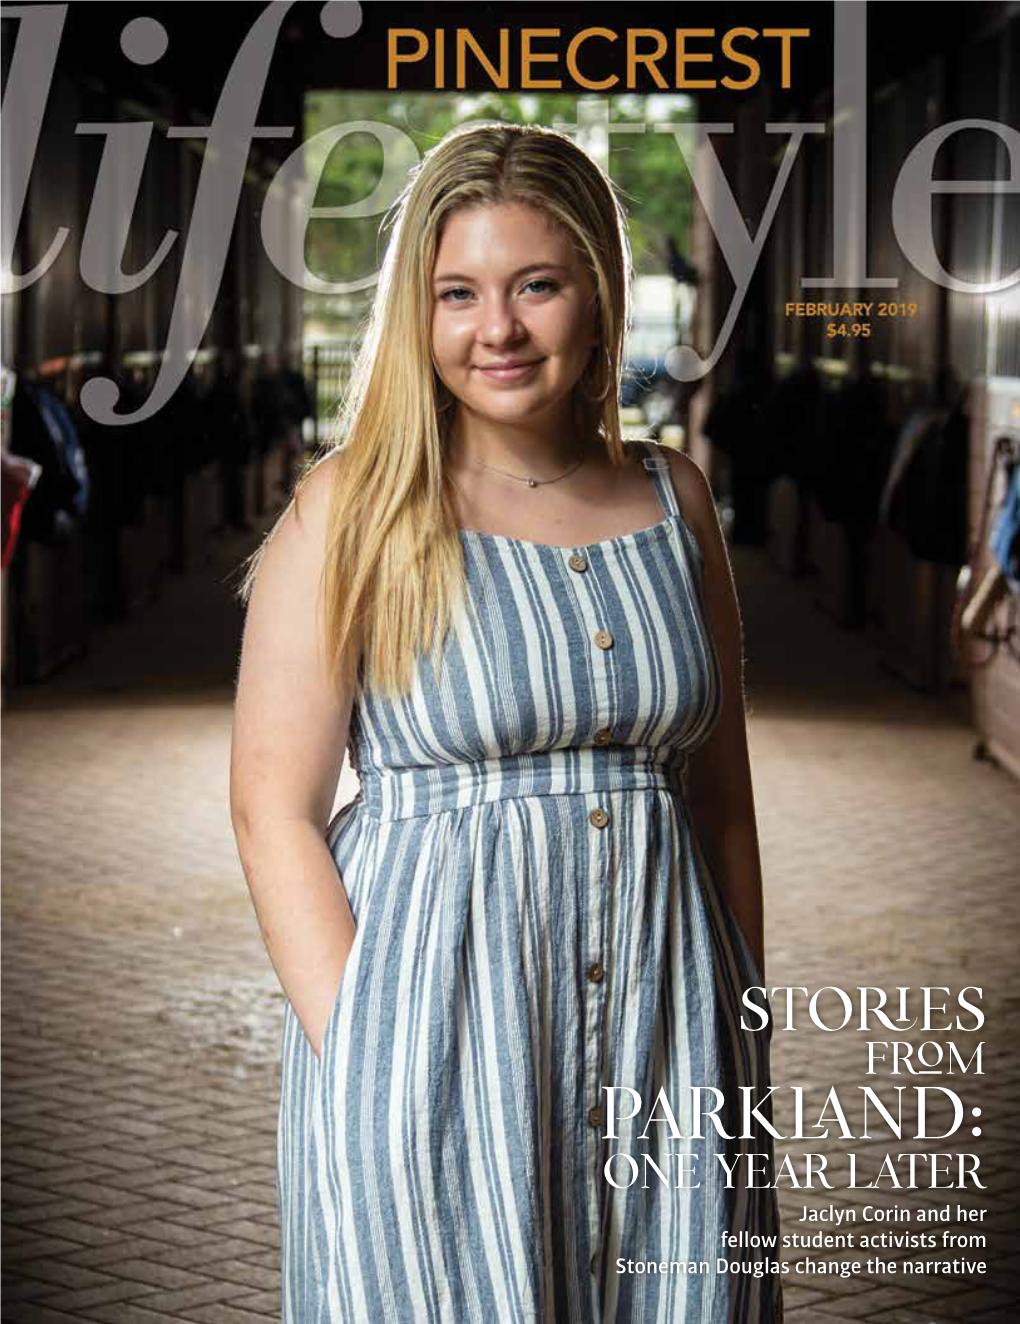 Jaclyn Corin and Her Fellow Student Activists from Stoneman Douglas Change the Narrative PINECRESTMAGAZINE.COM | FEBRUARY 2019 1